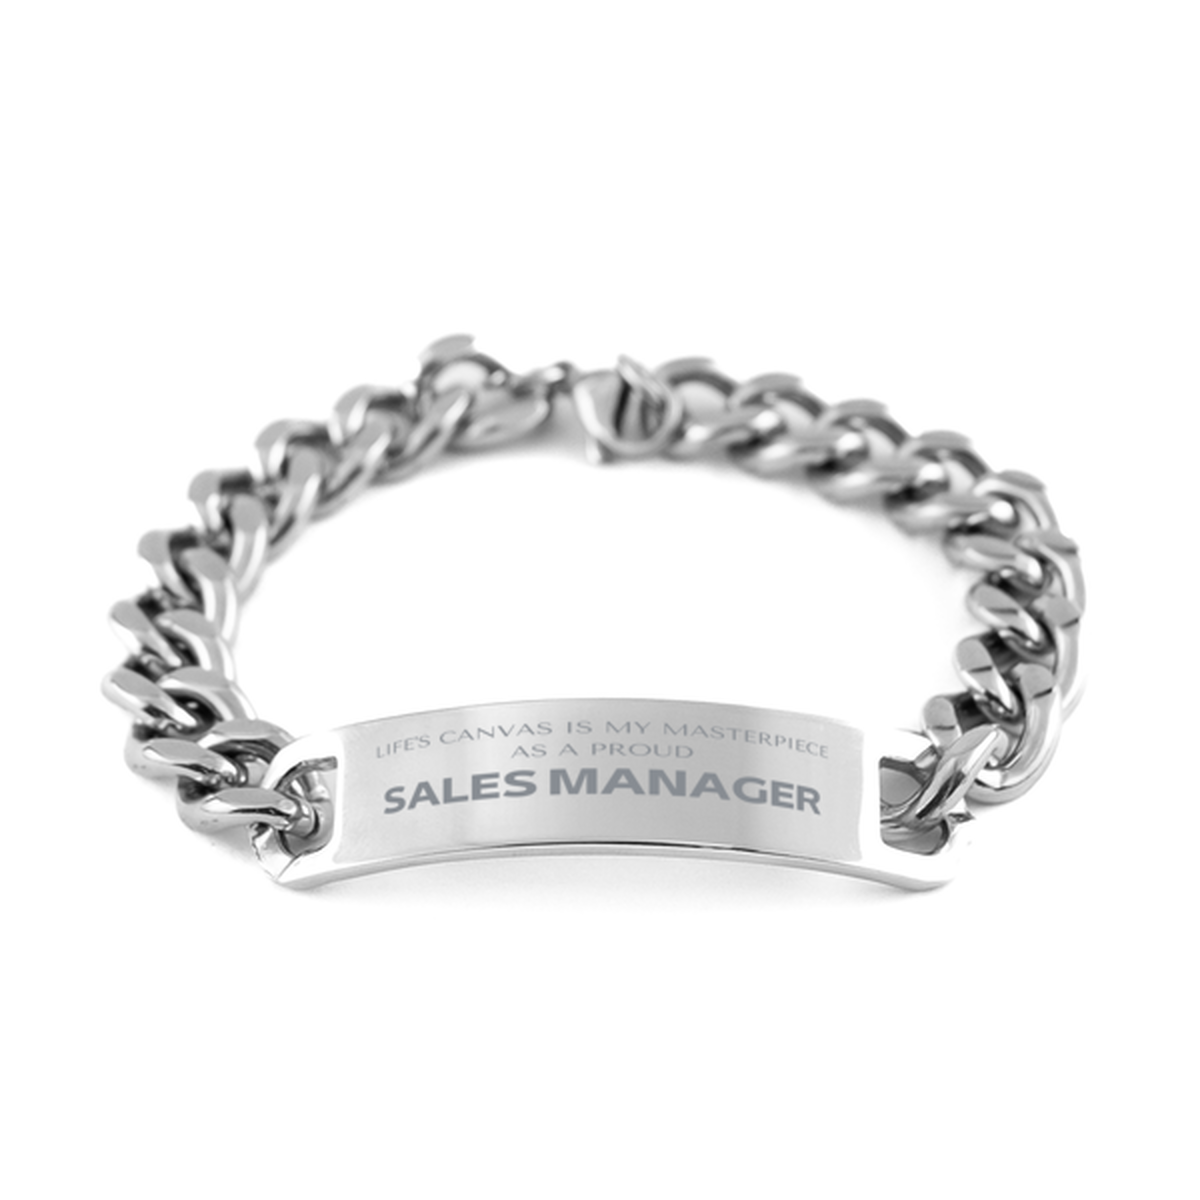 Proud Sales Manager Gifts, Life's canvas is my masterpiece, Epic Birthday Christmas Unique Cuban Chain Stainless Steel Bracelet For Sales Manager, Coworkers, Men, Women, Friends